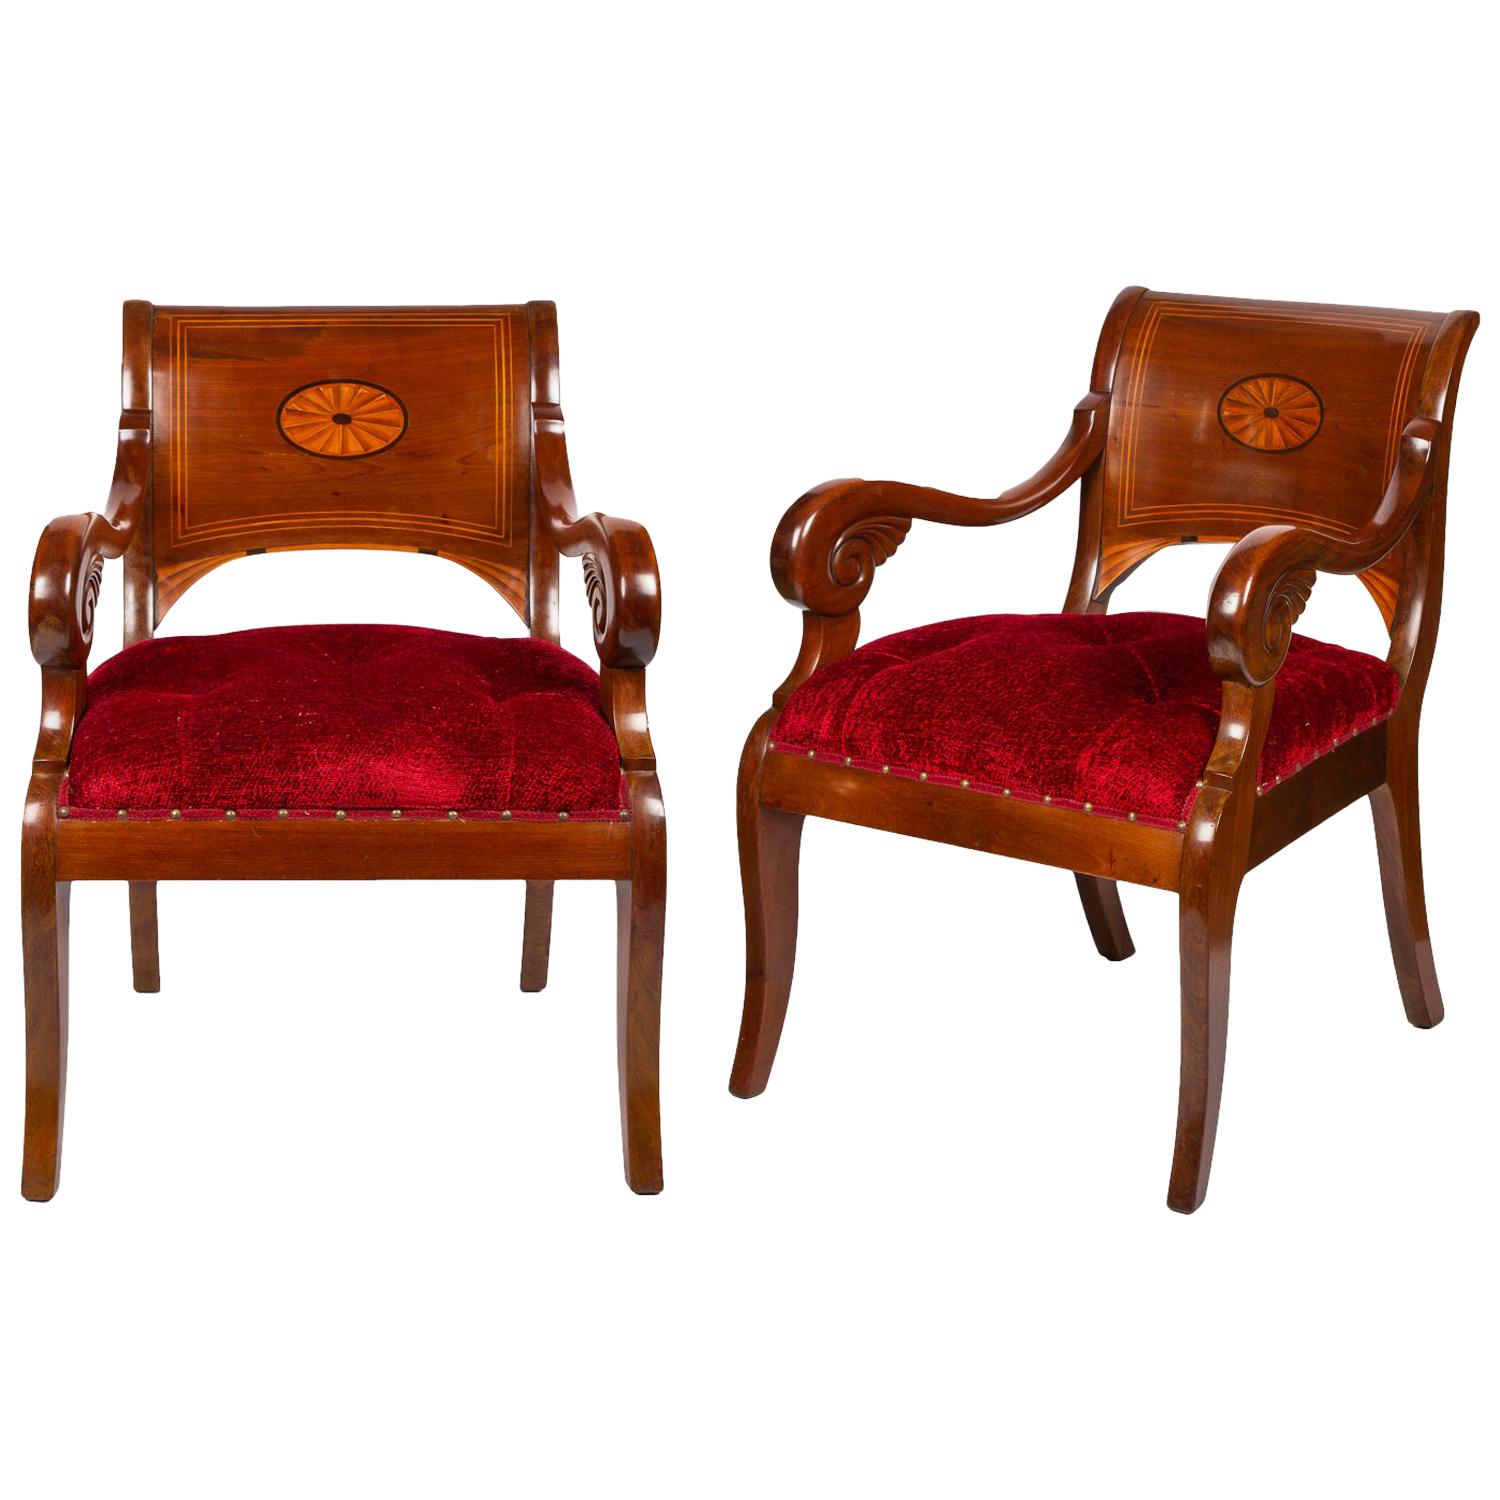 Pair of Mahogany Armchairs with Carved and Inlaid Decoration